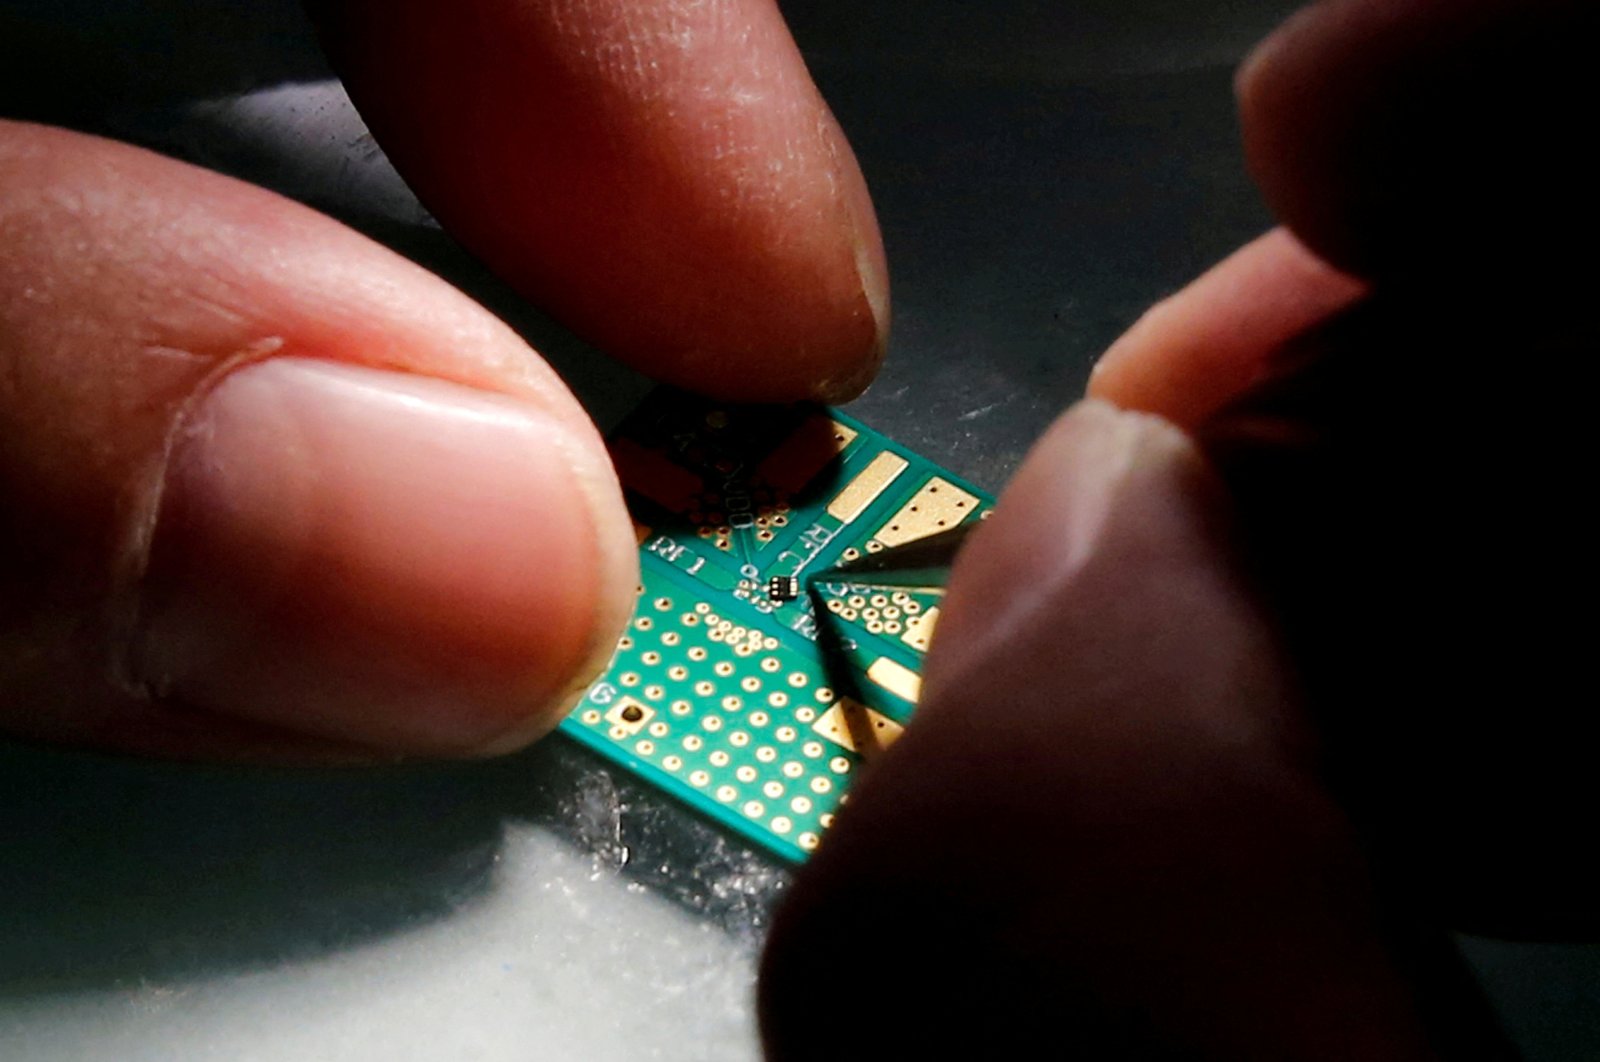 A researcher plants a semiconductor on an interface board during research work to design and develop a semiconductor product at Tsinghua Unigroup research center, Beijing, China, Feb. 29, 2016. (Reuters Photo)